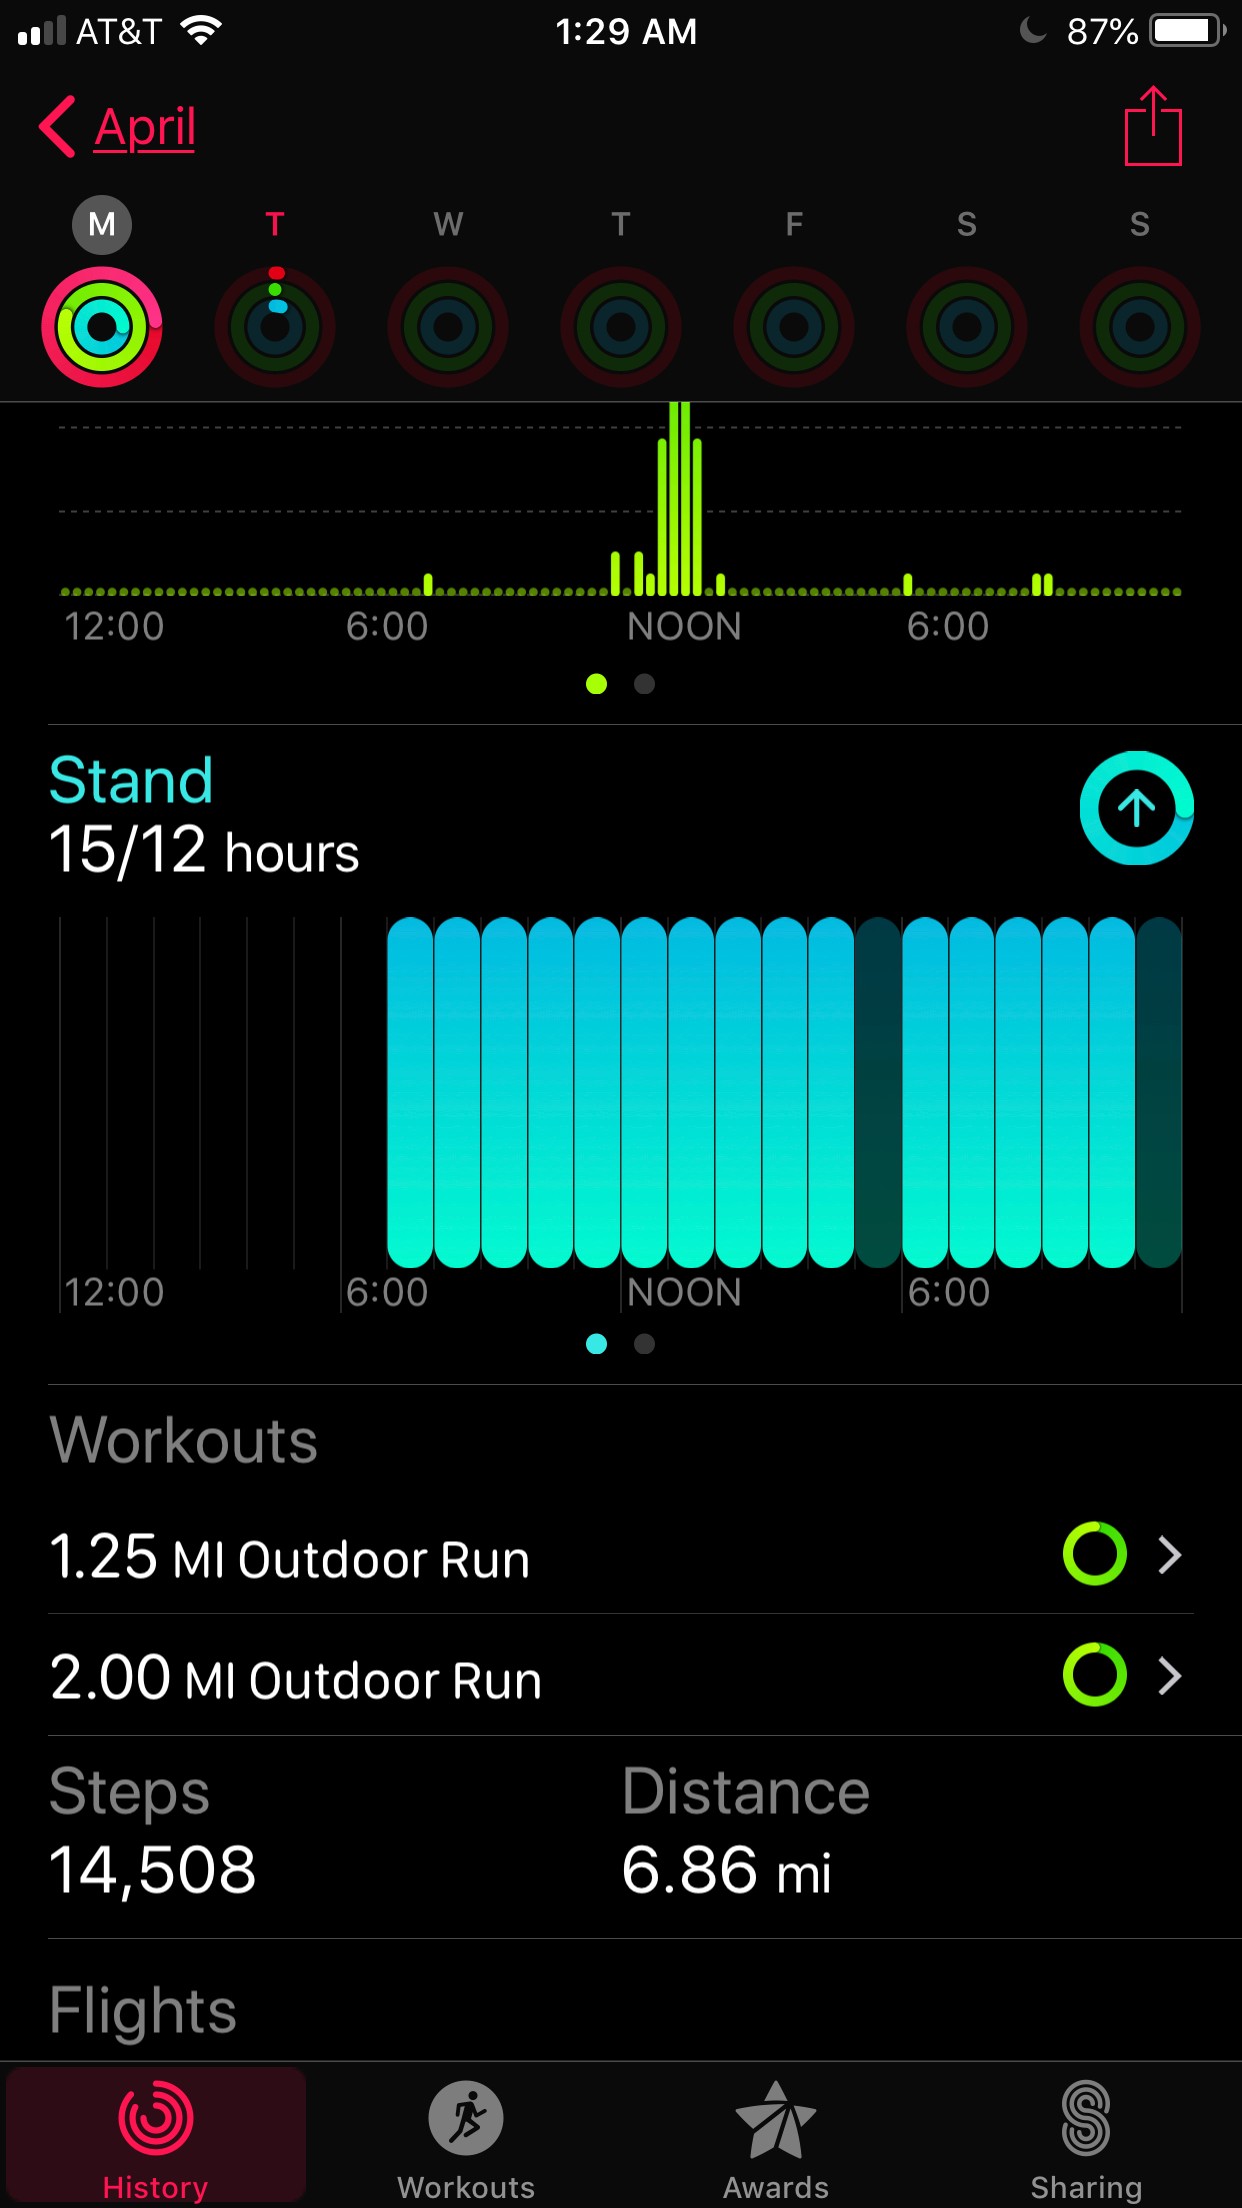 I walked 5,000 steps with the Apple Watch Series 7 and Garmin